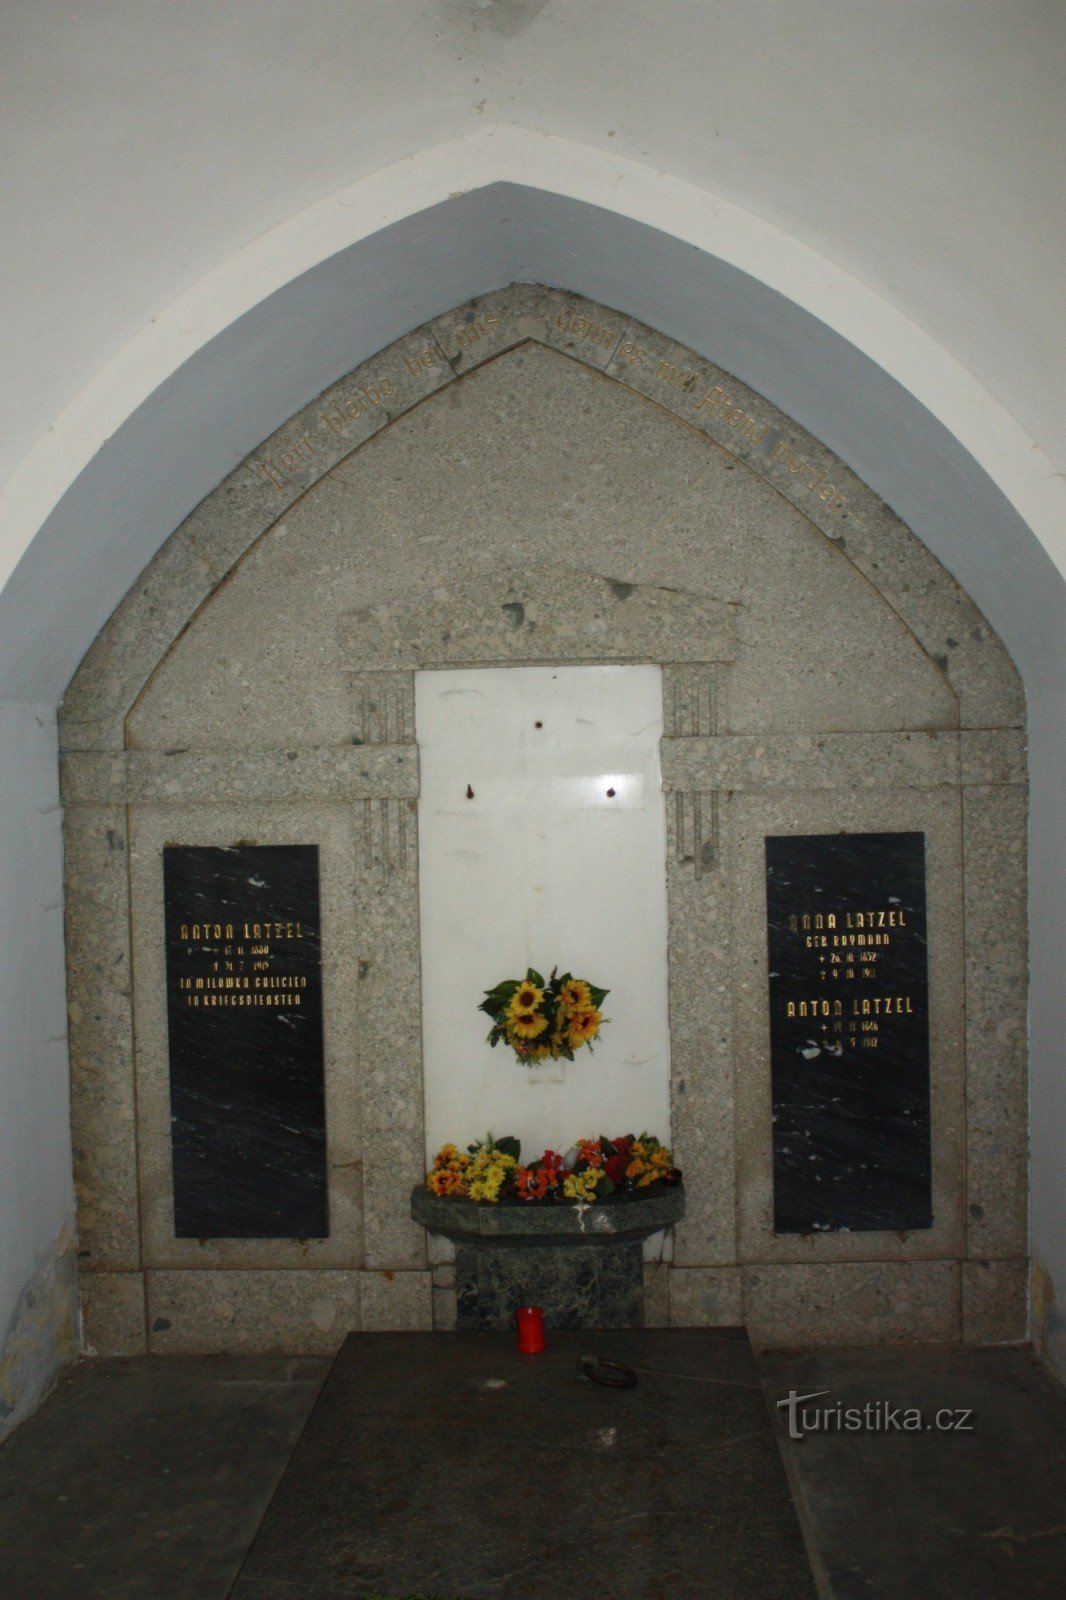 The interior of the tomb of the Latzel family in the Parský les near Vidnava